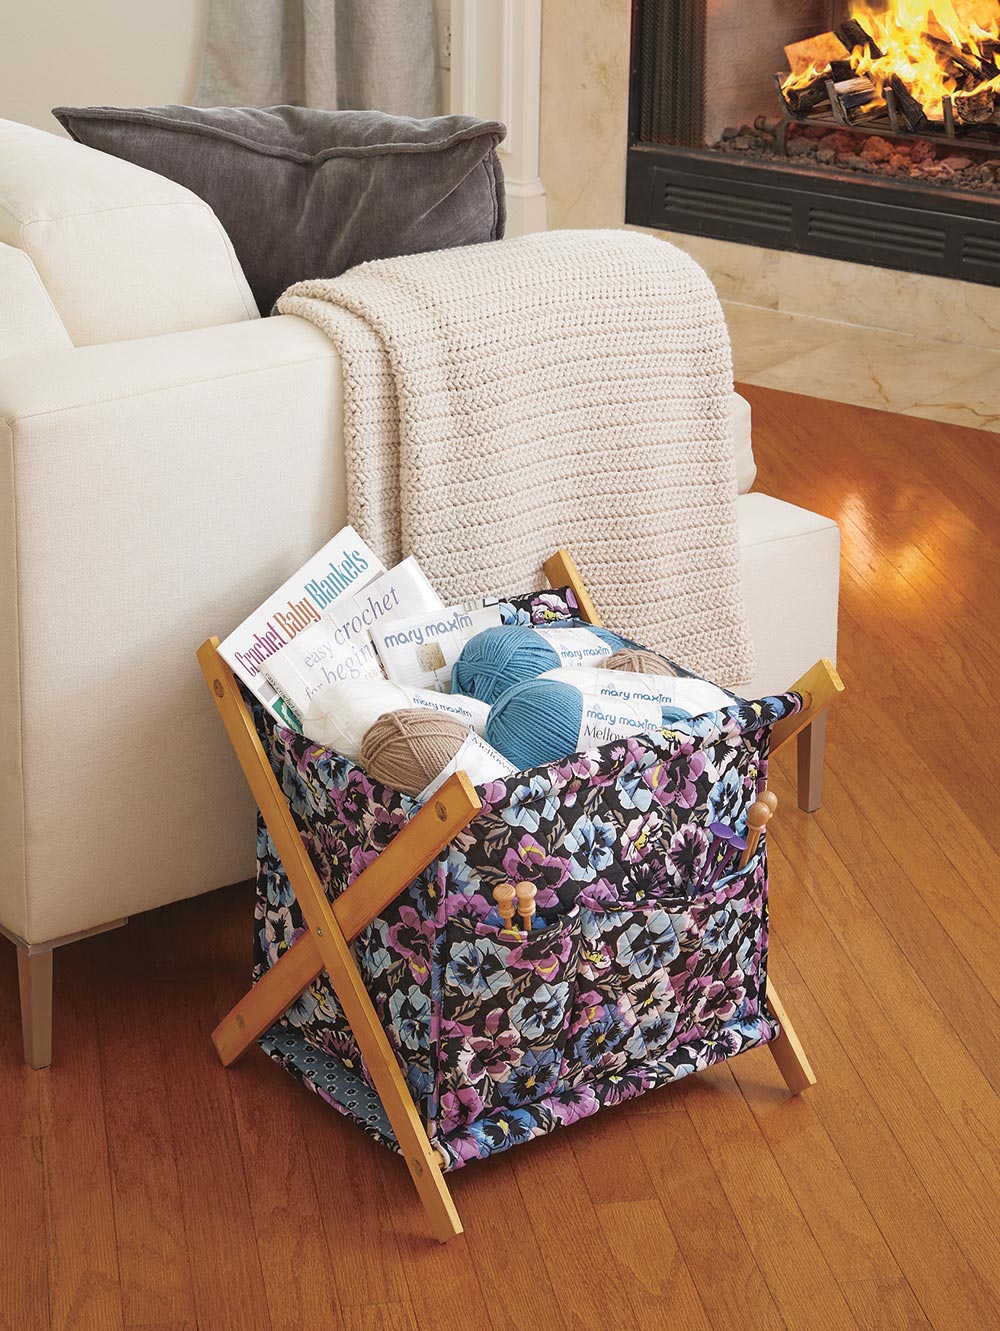 Passionate Pansies Yarn Caddy